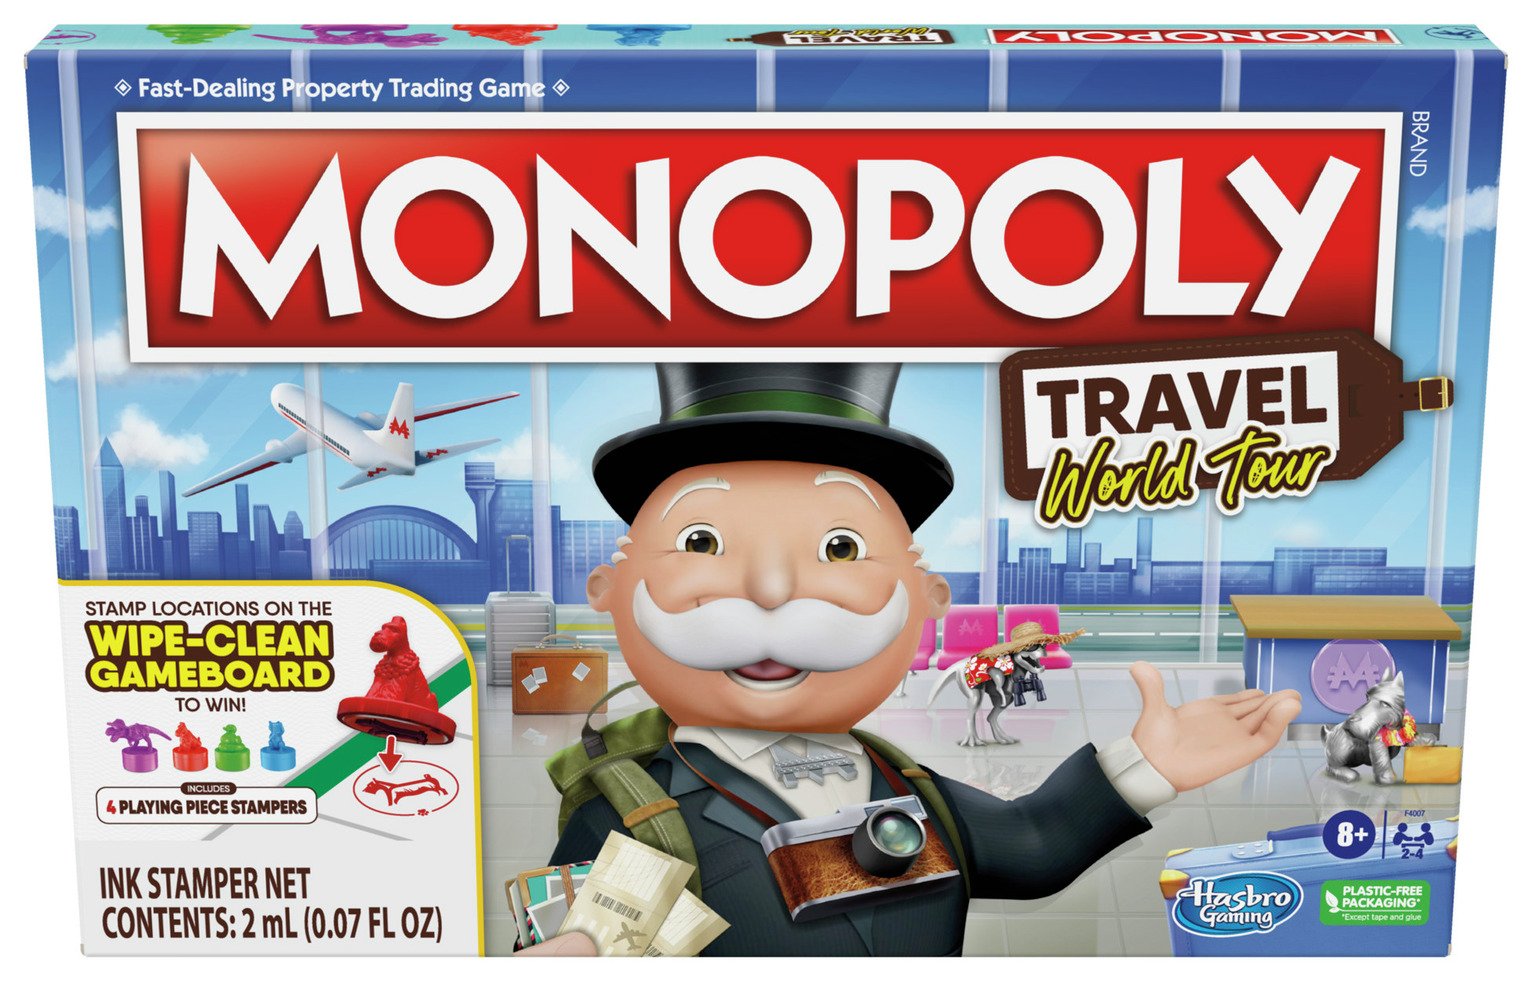 Monopoly Travel World Tour Board Game review